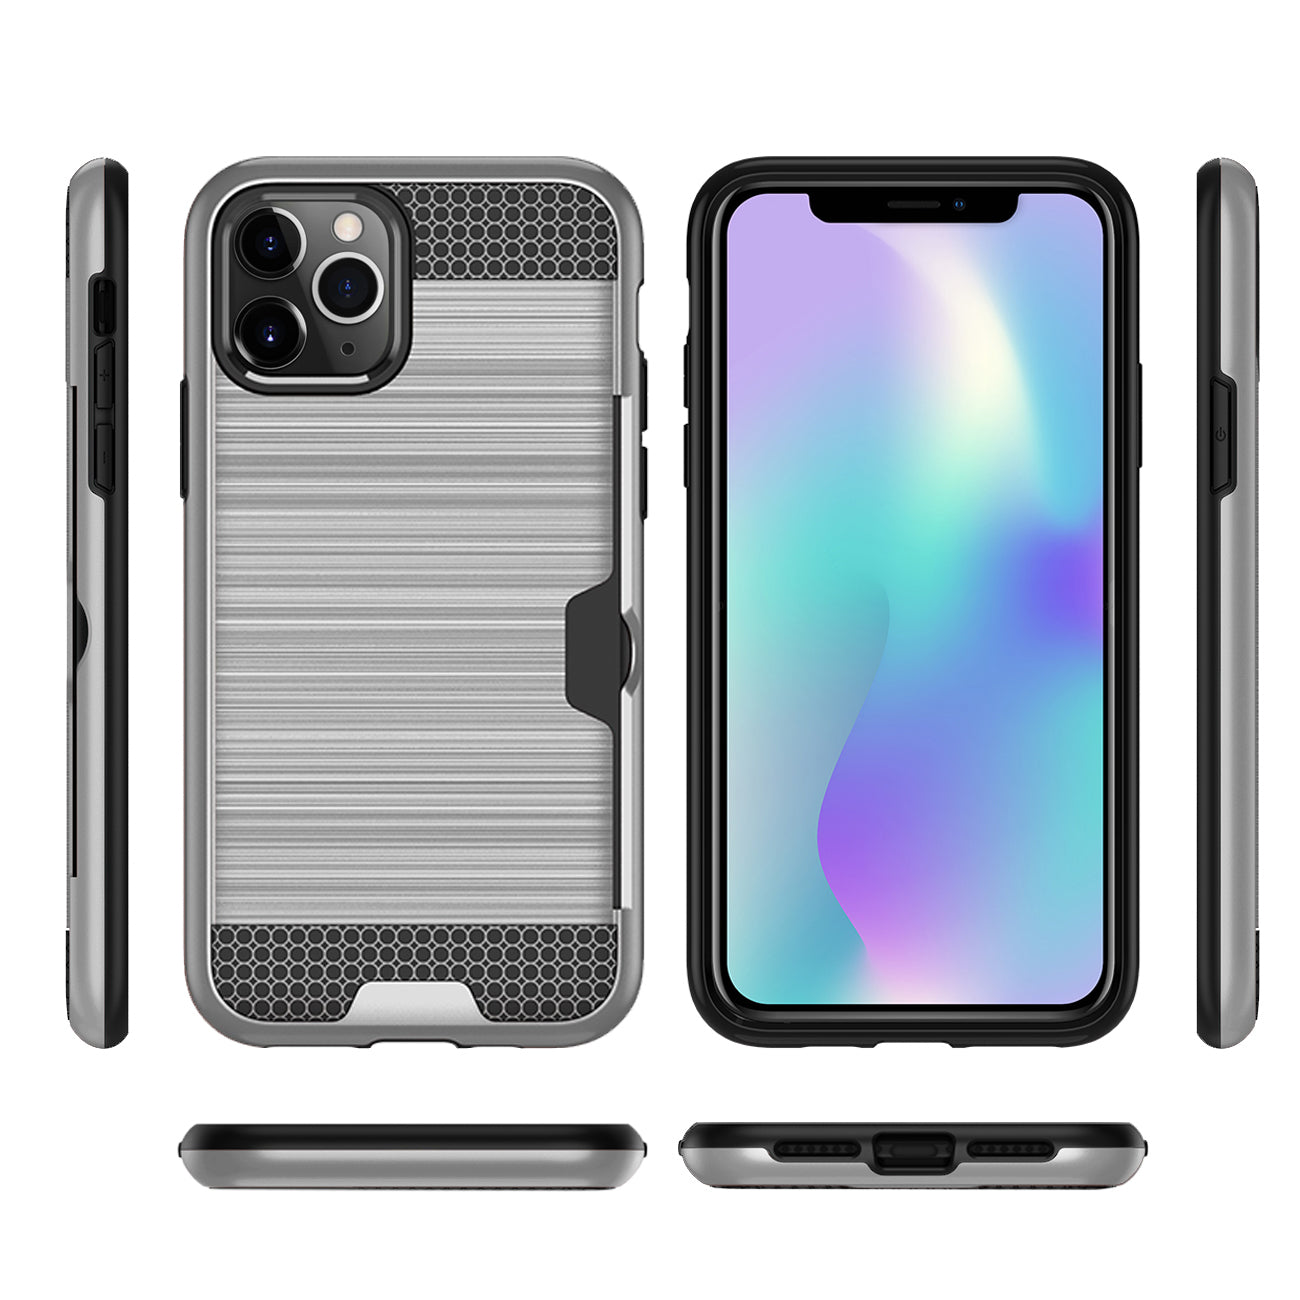 iPhone 11 PRO MAX SLIM ARMOR HYBRID CASE WITH CARD HOLDER IN SILVER